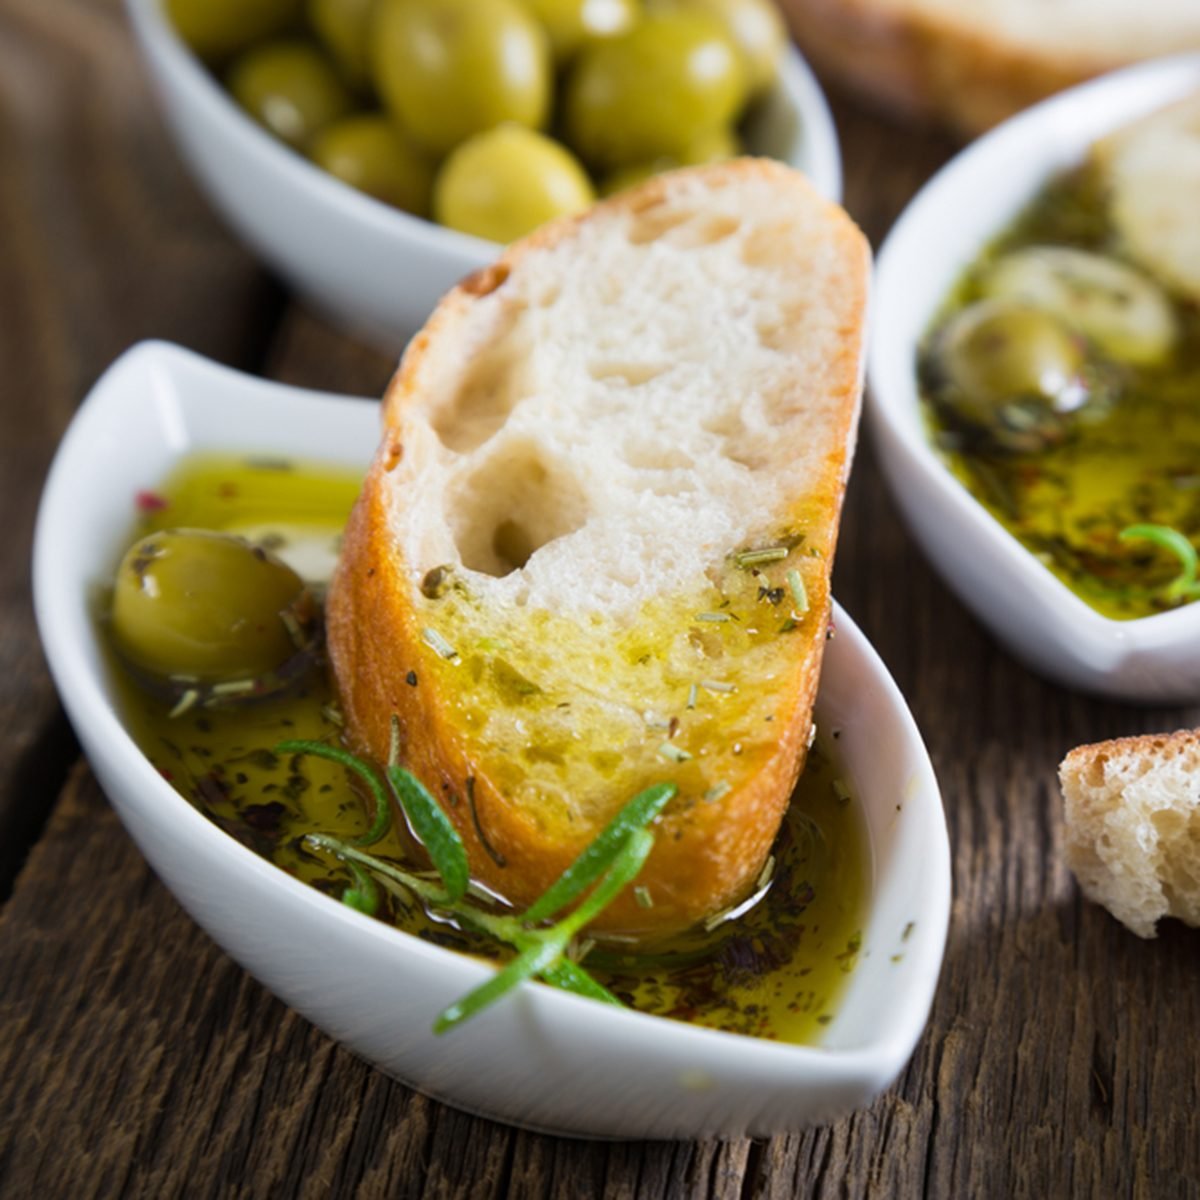 The bread dipped in olive oil with herbs and spices